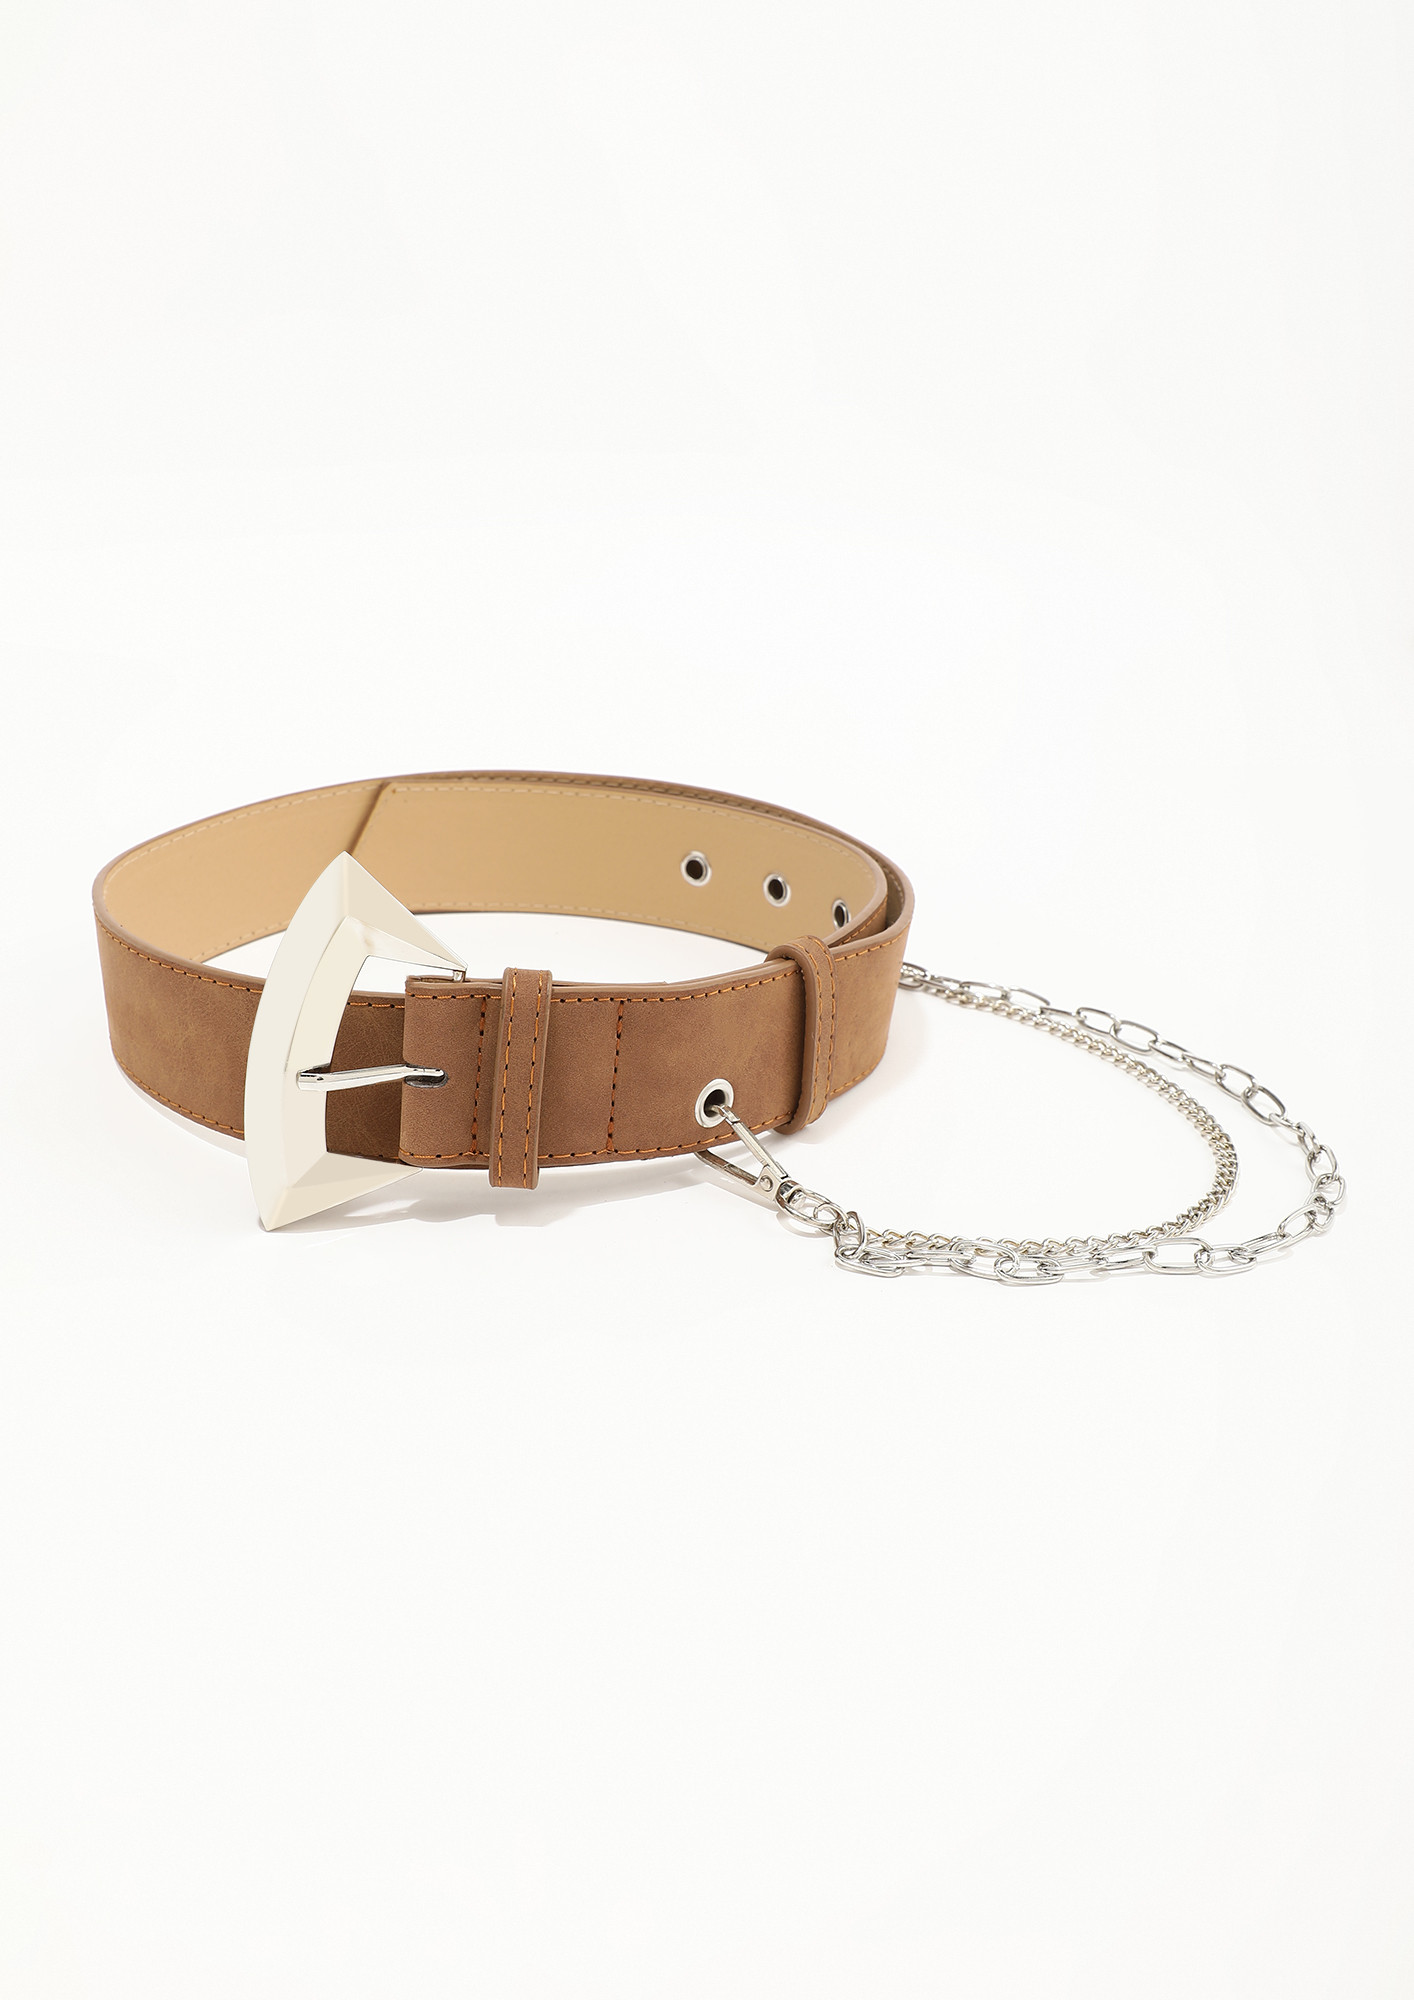 QUIRKY LOOKS CAMEL BELT